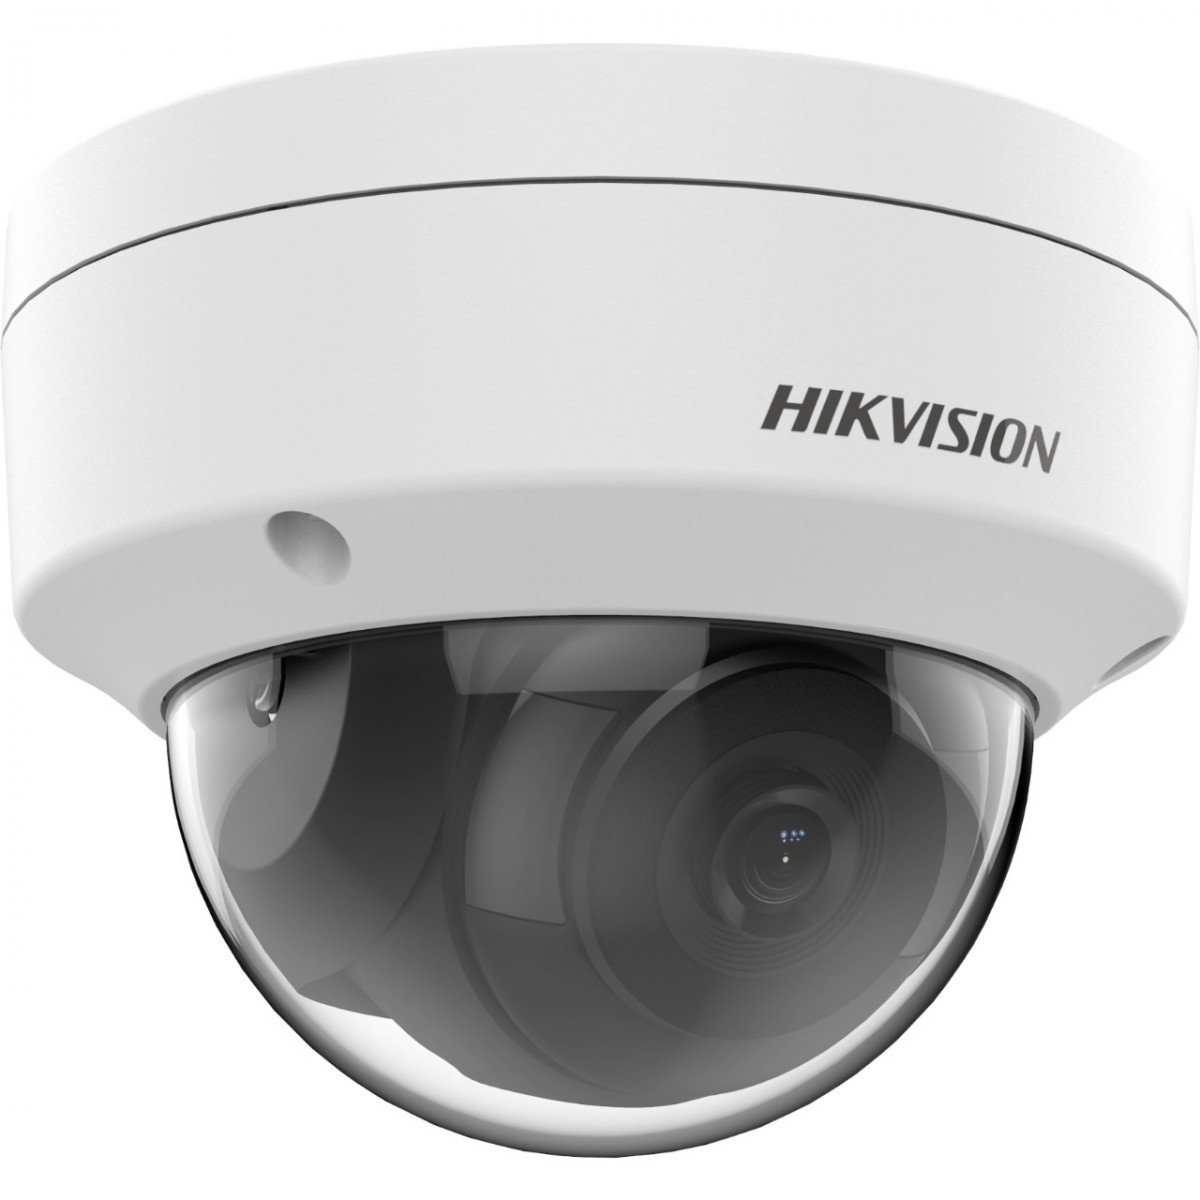 Hikvision Digital Technology DS-2CD2143G2-I - IP security camera - Outdoor - Wired - FCC SDoC (47 CFR 15 - B); CE-EMC (EN 55032: